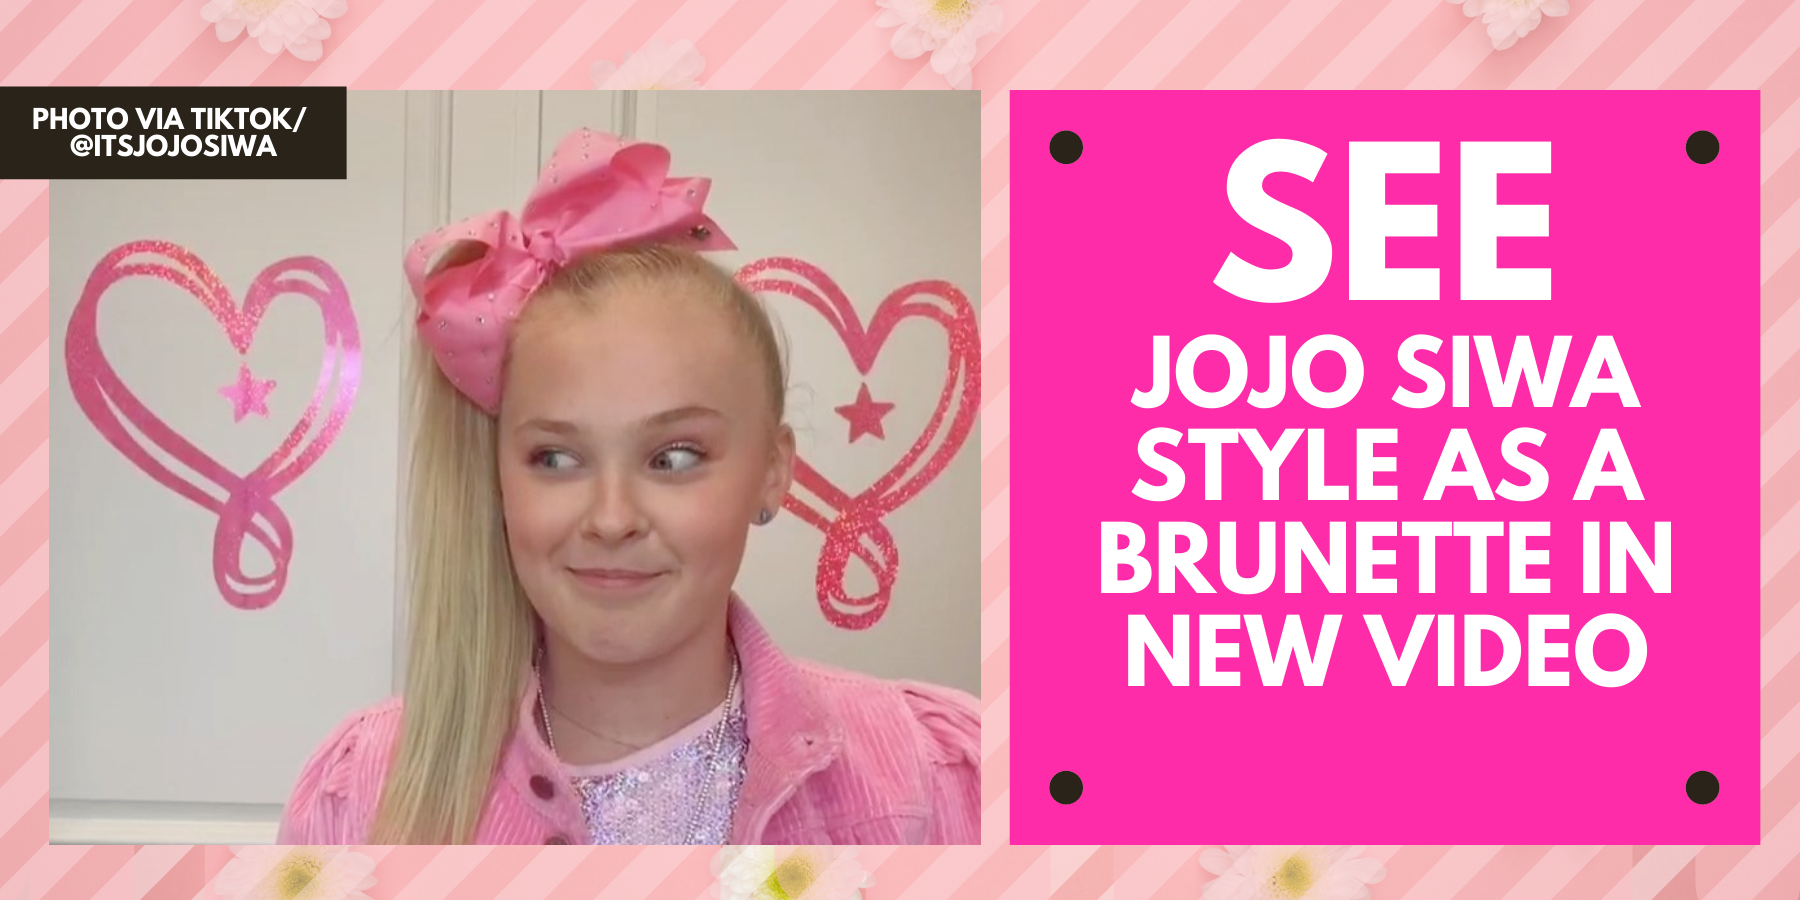 Jojo Siwa Is Unrecognizable With New Hair Total Girl Inspo